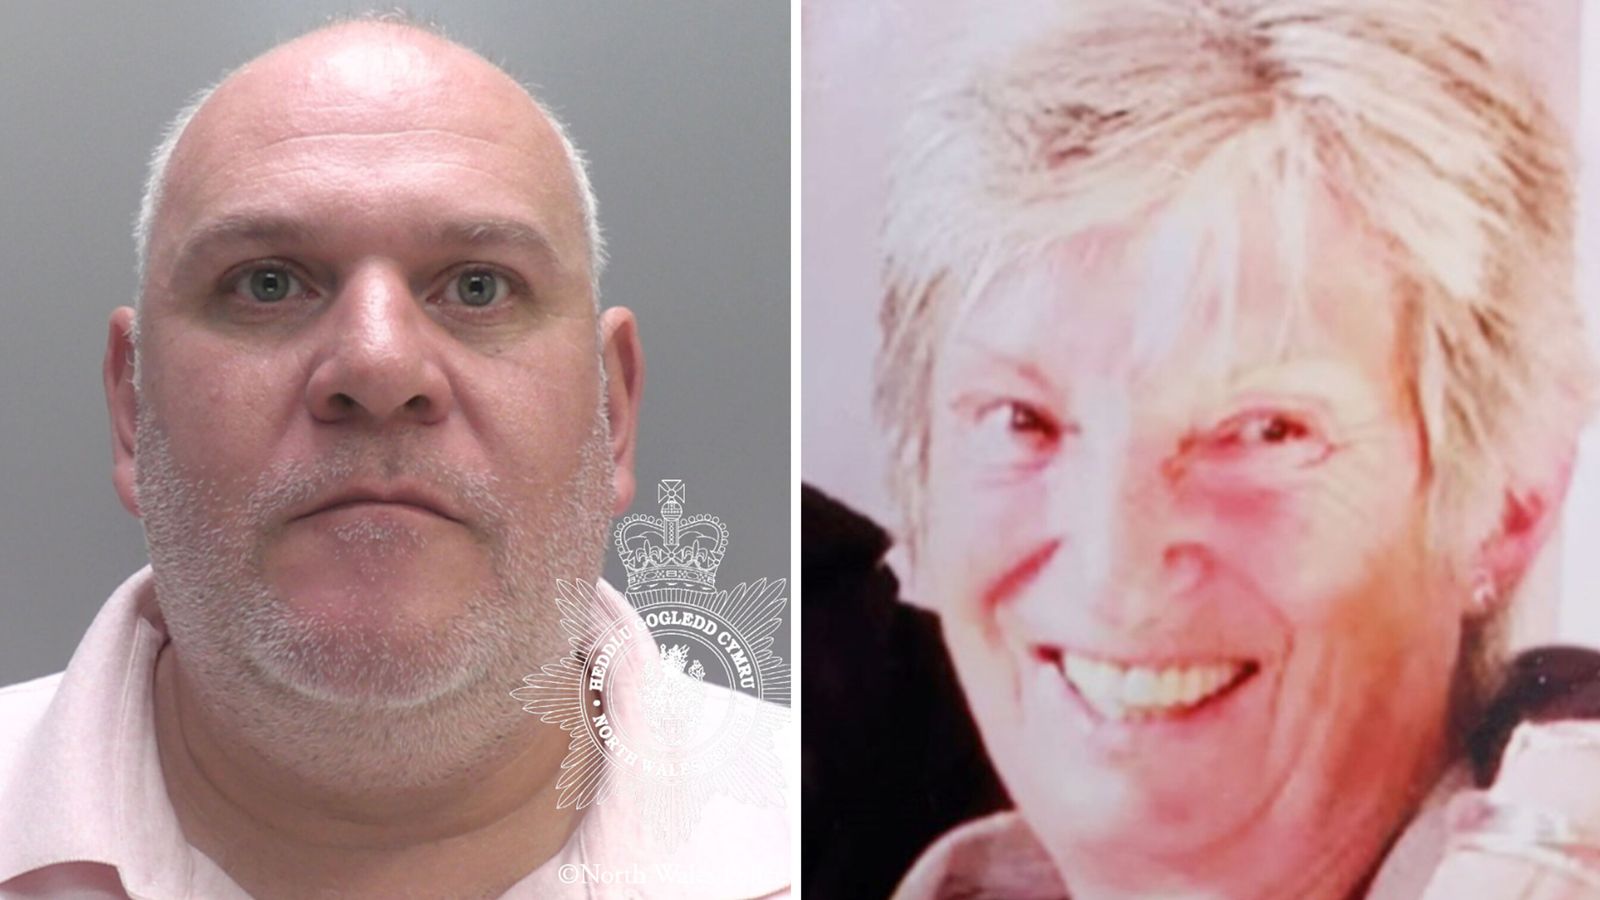 Man who murdered woman after she mistook his home for B&B jailed for life